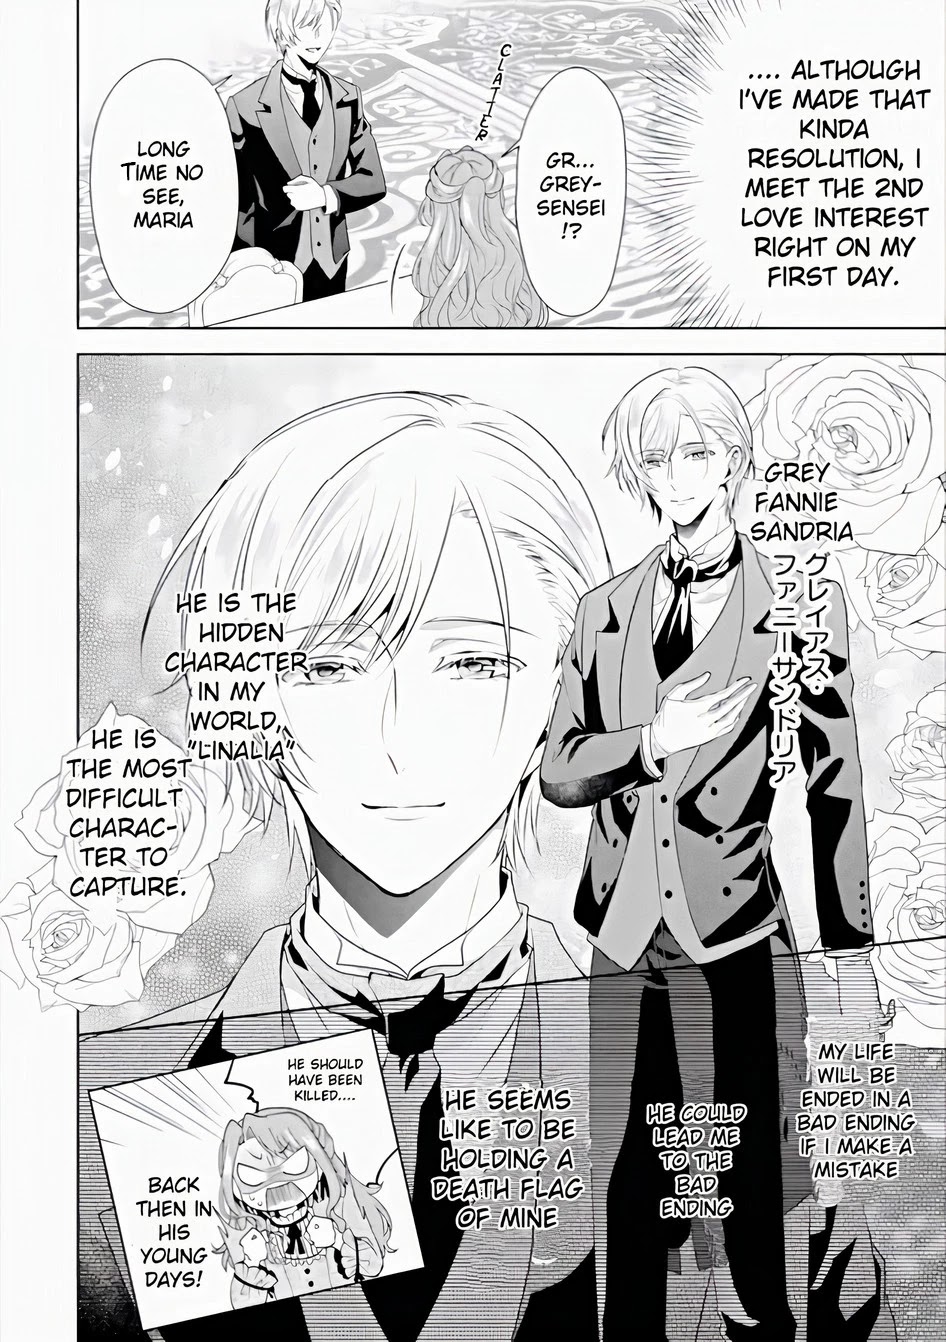 Auto-Mode Expired In The 6Th Round Of The Otome Game - Page 2